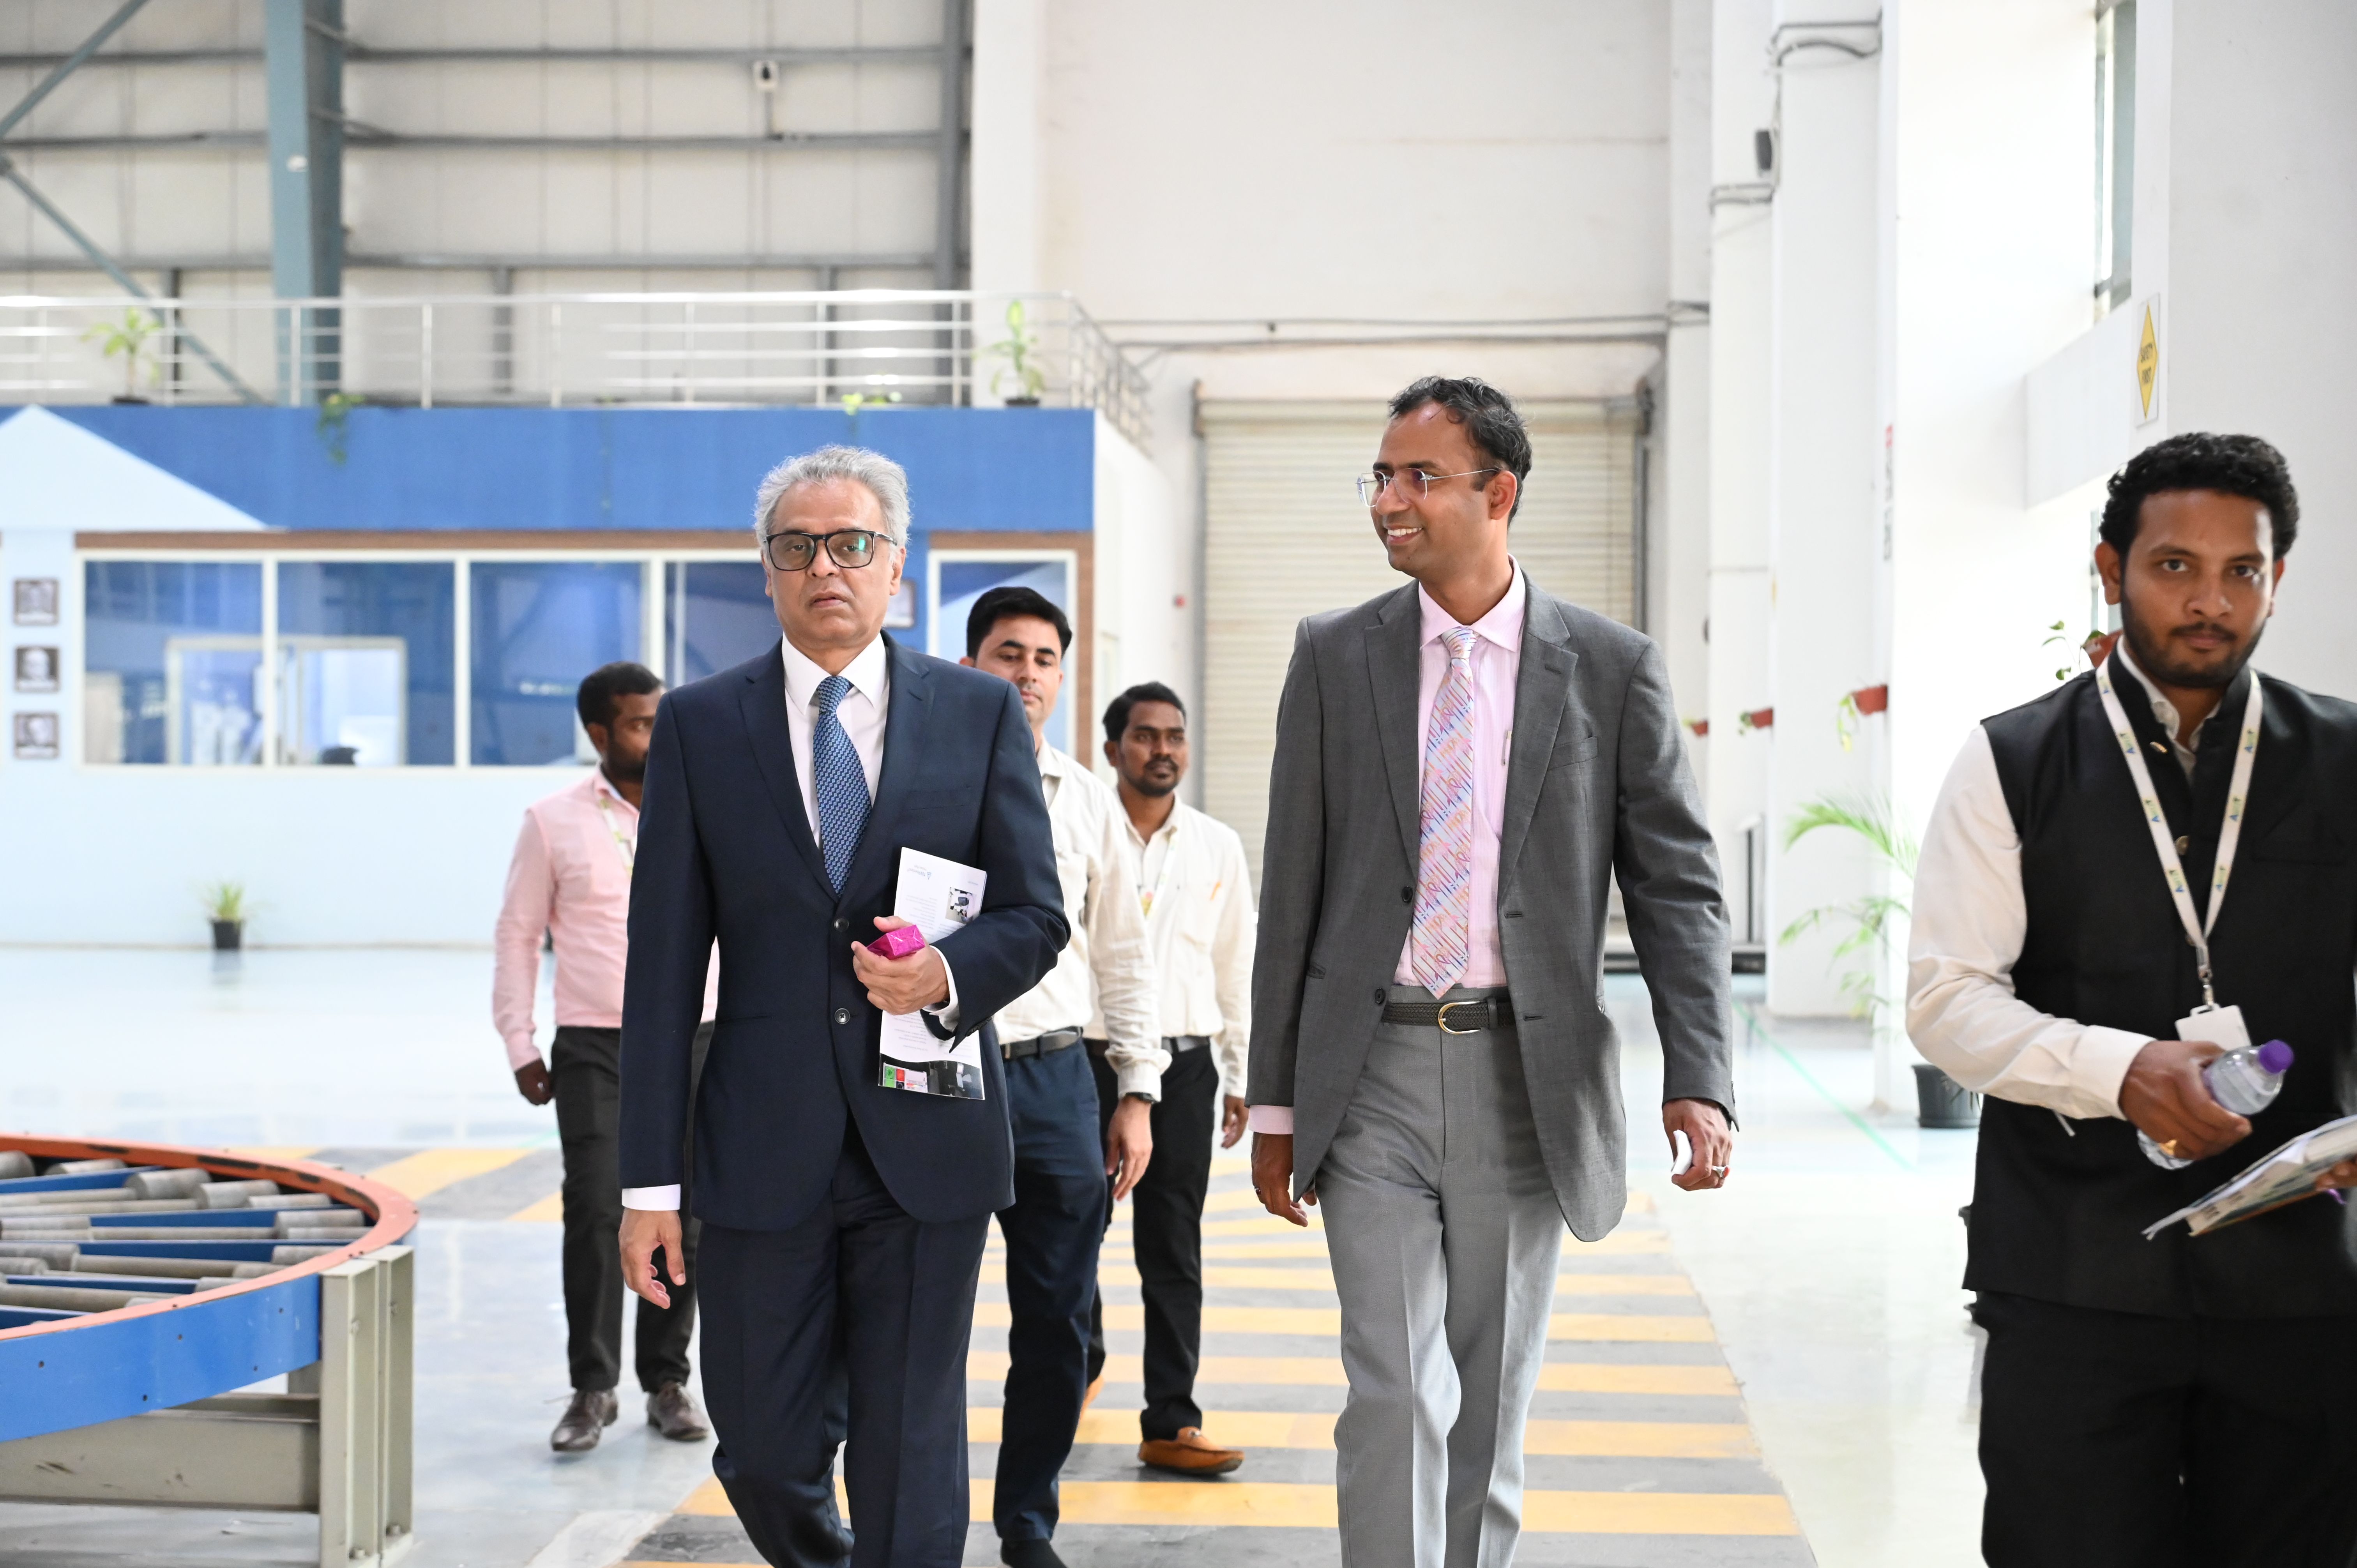 Mr. Syed Akbaruddin, Former Permanent Representative of India to the UN, visited Dr. Jitendra Sharma at AMTZ to explore medical care and healthcare technology in India